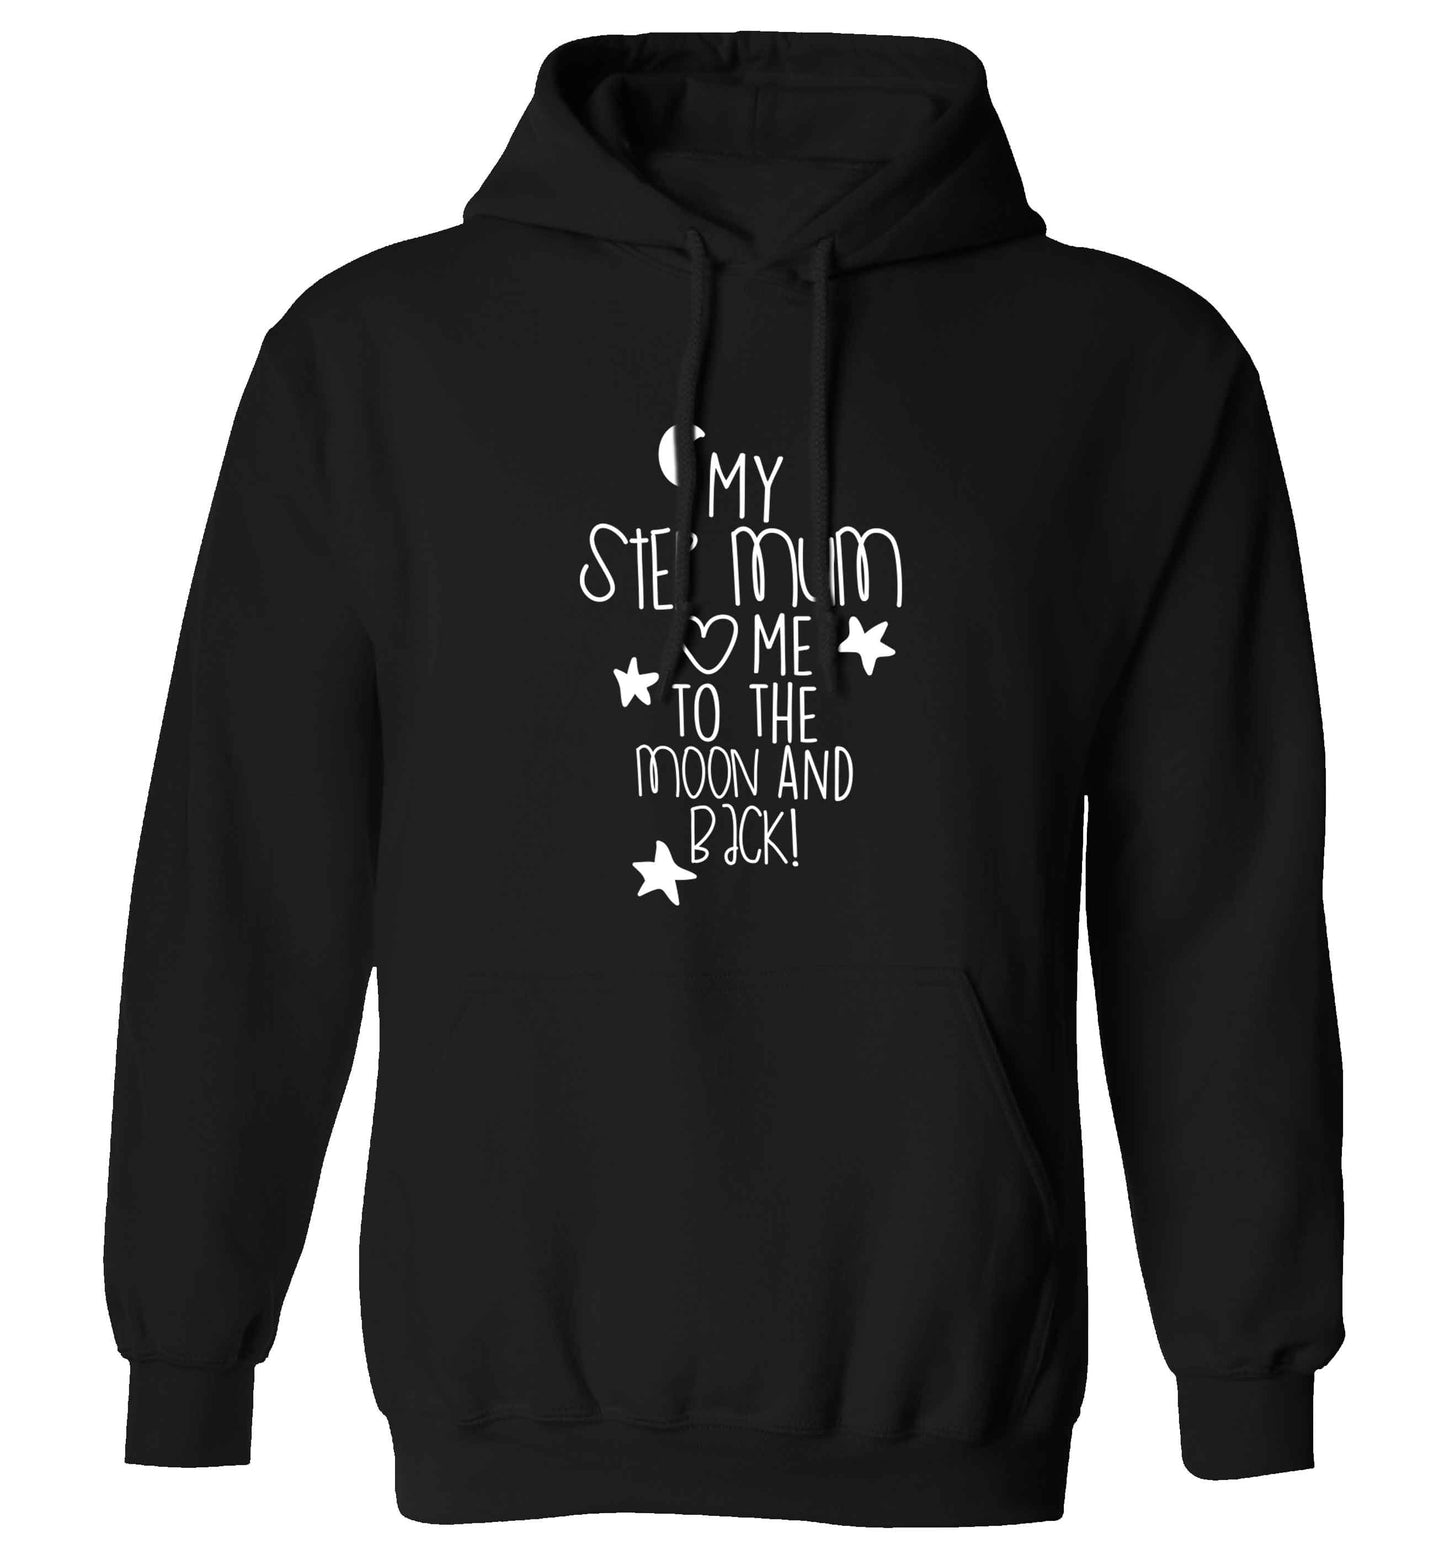 My step-mum loves me to the moon and back adults unisex black hoodie 2XL